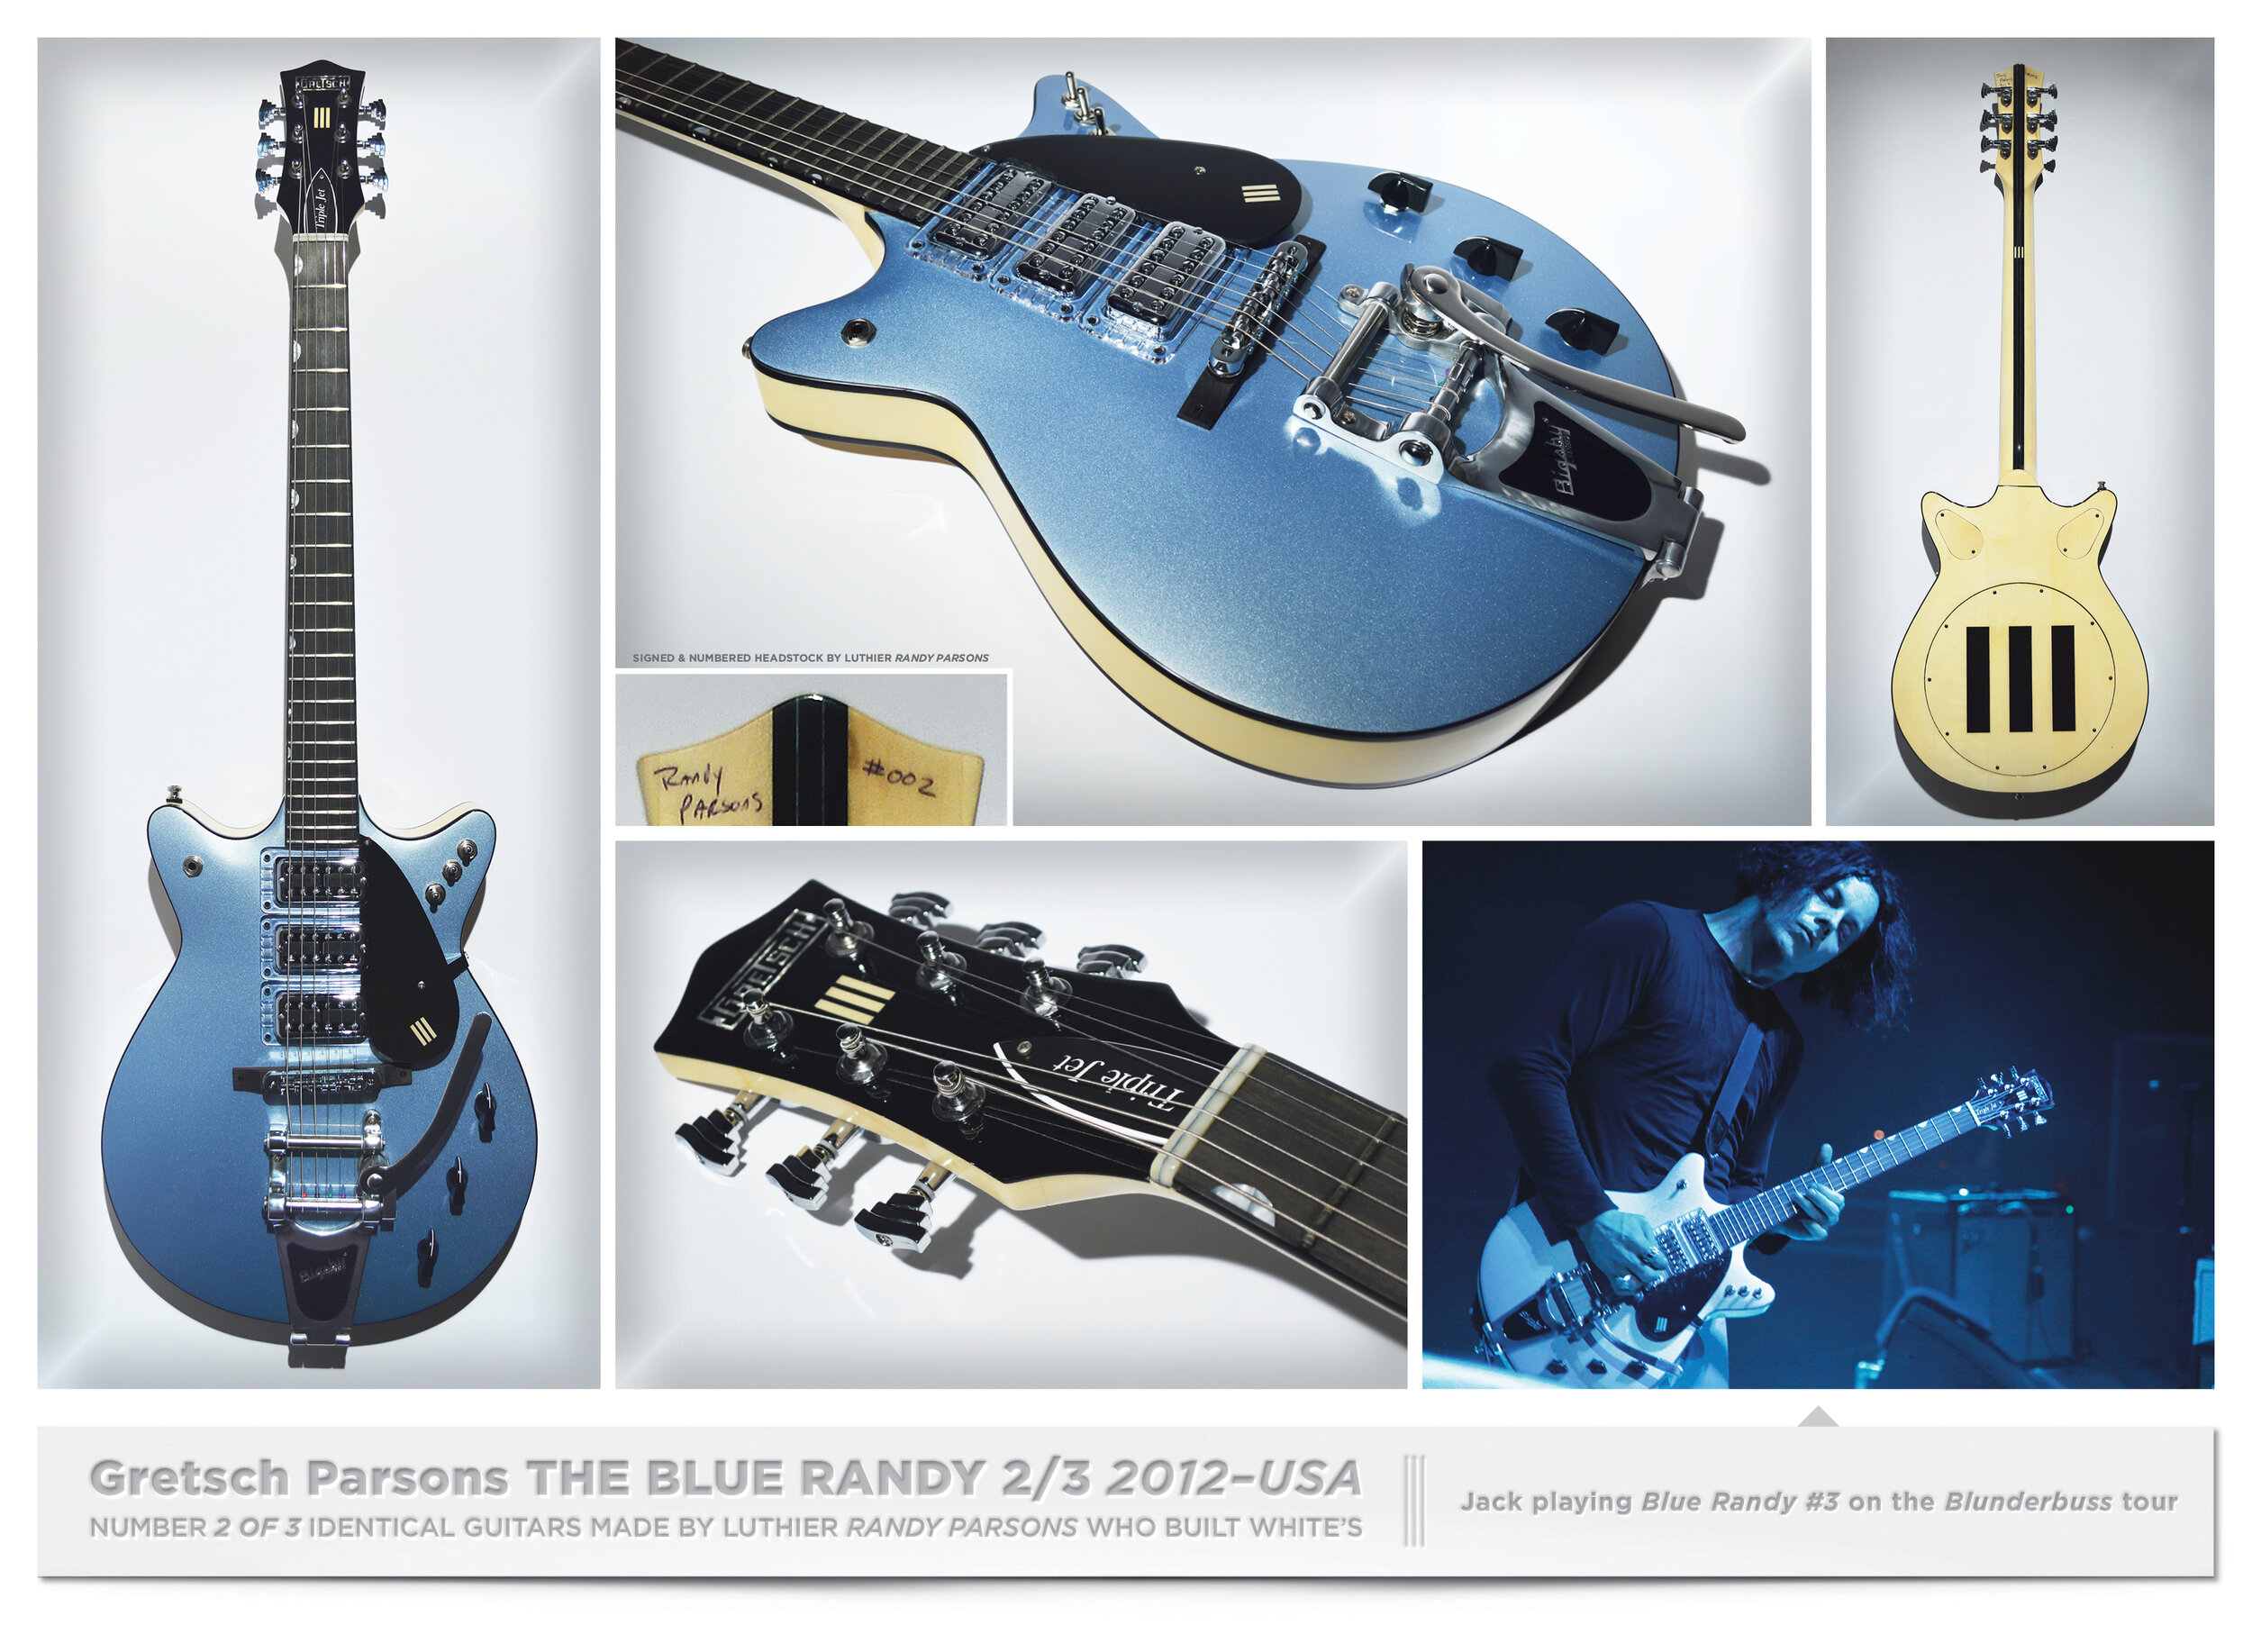 12 Gretsch Parsons THE BLUE RANDY 2:3 2012–USA THE JACK WHITE GUITAR COLLECTION FINAL LAYOUT12.jpg